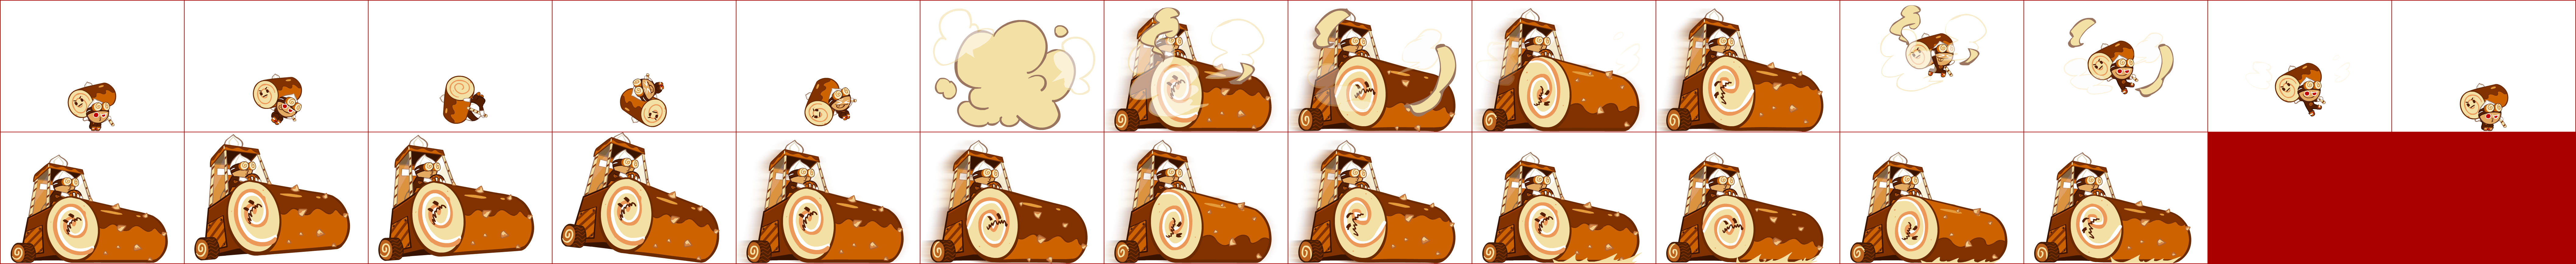 Roll Cake Cookie (Road Roller)